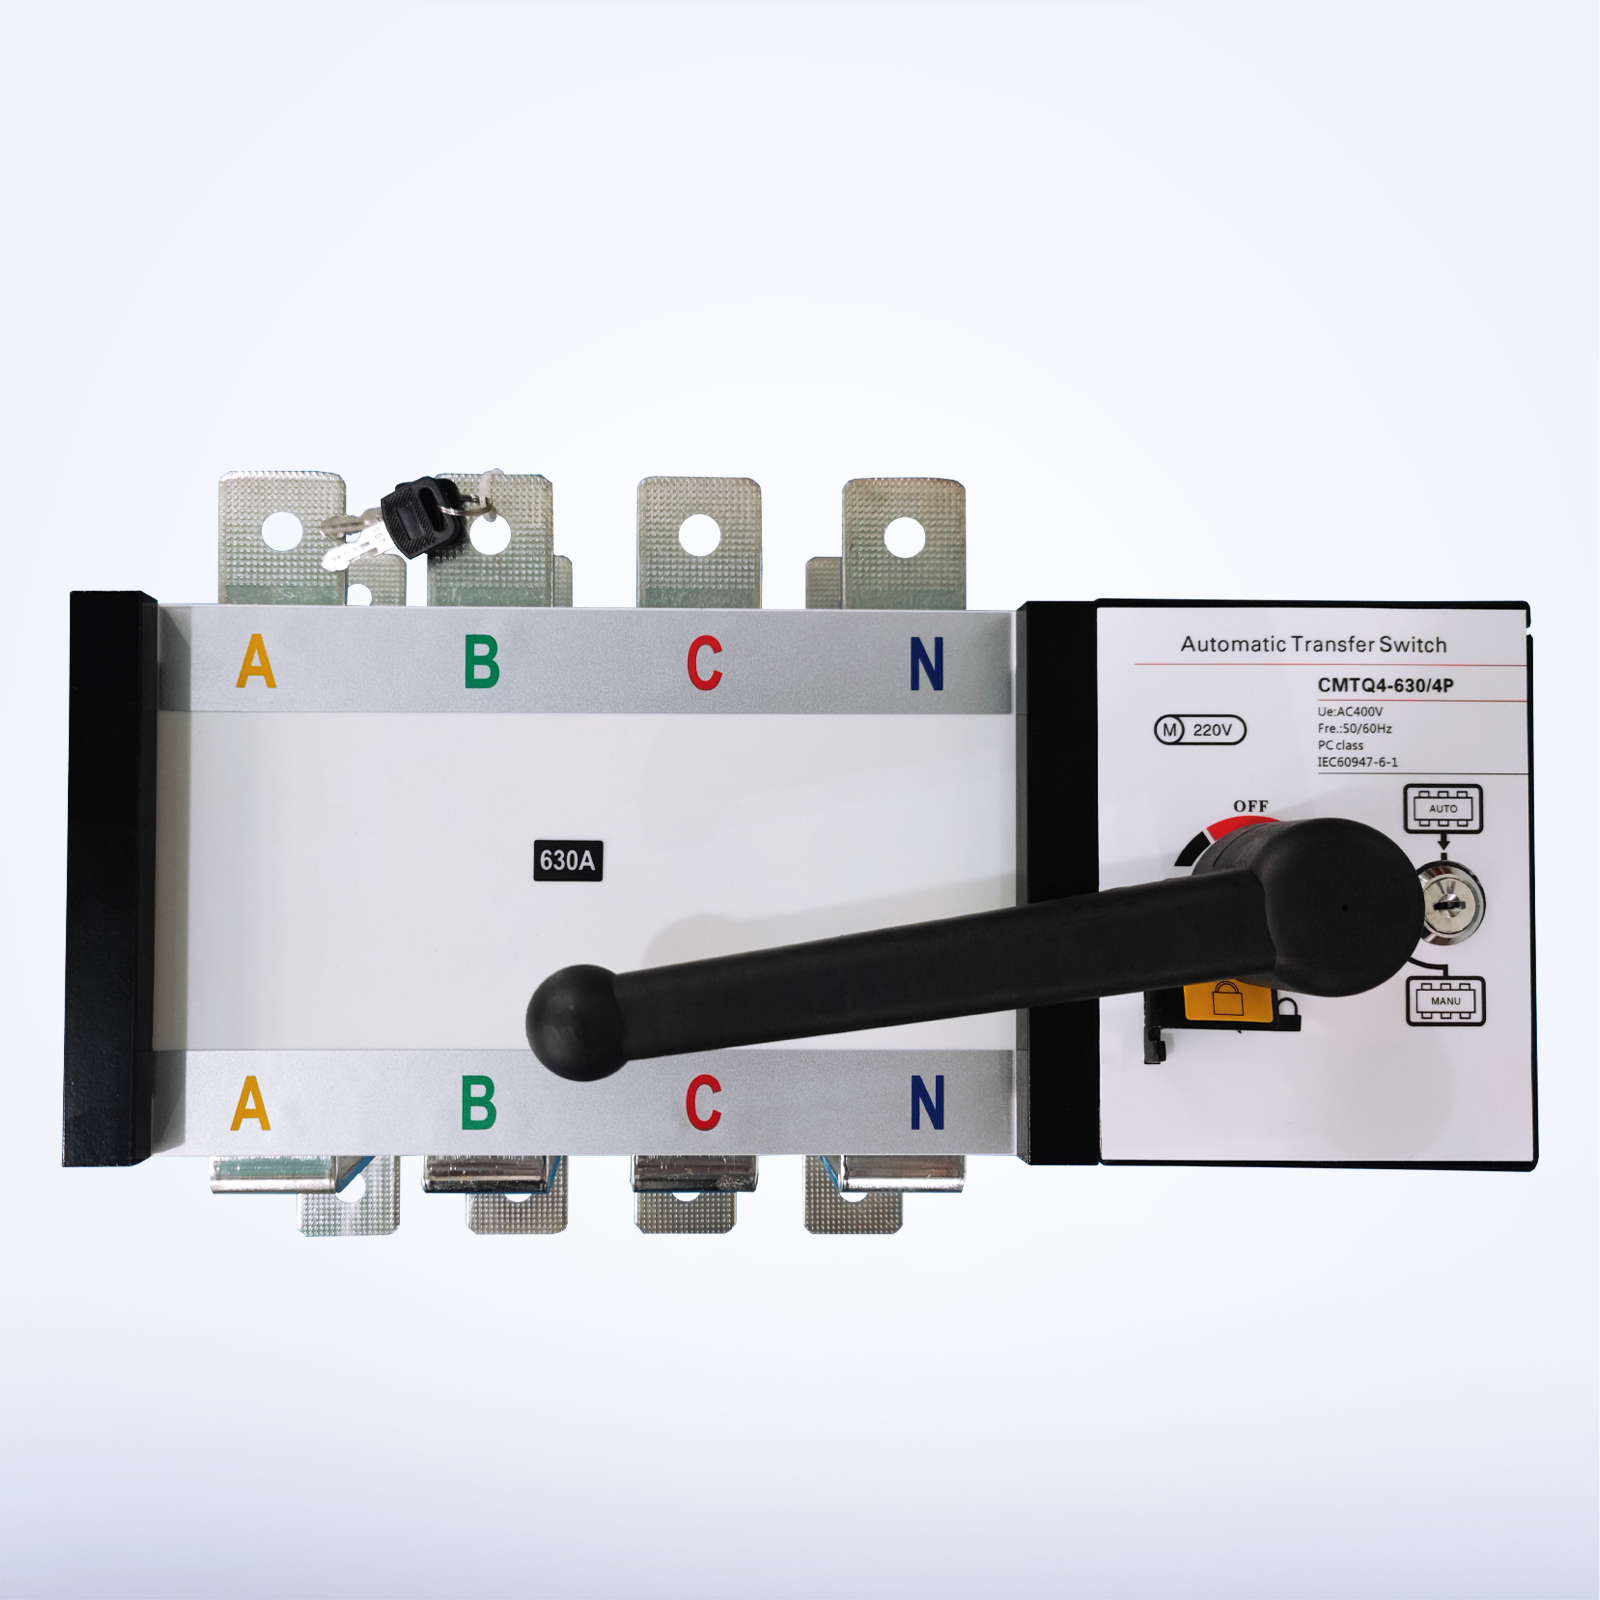 Top Auto Transfer Switch for Efficient Power Management